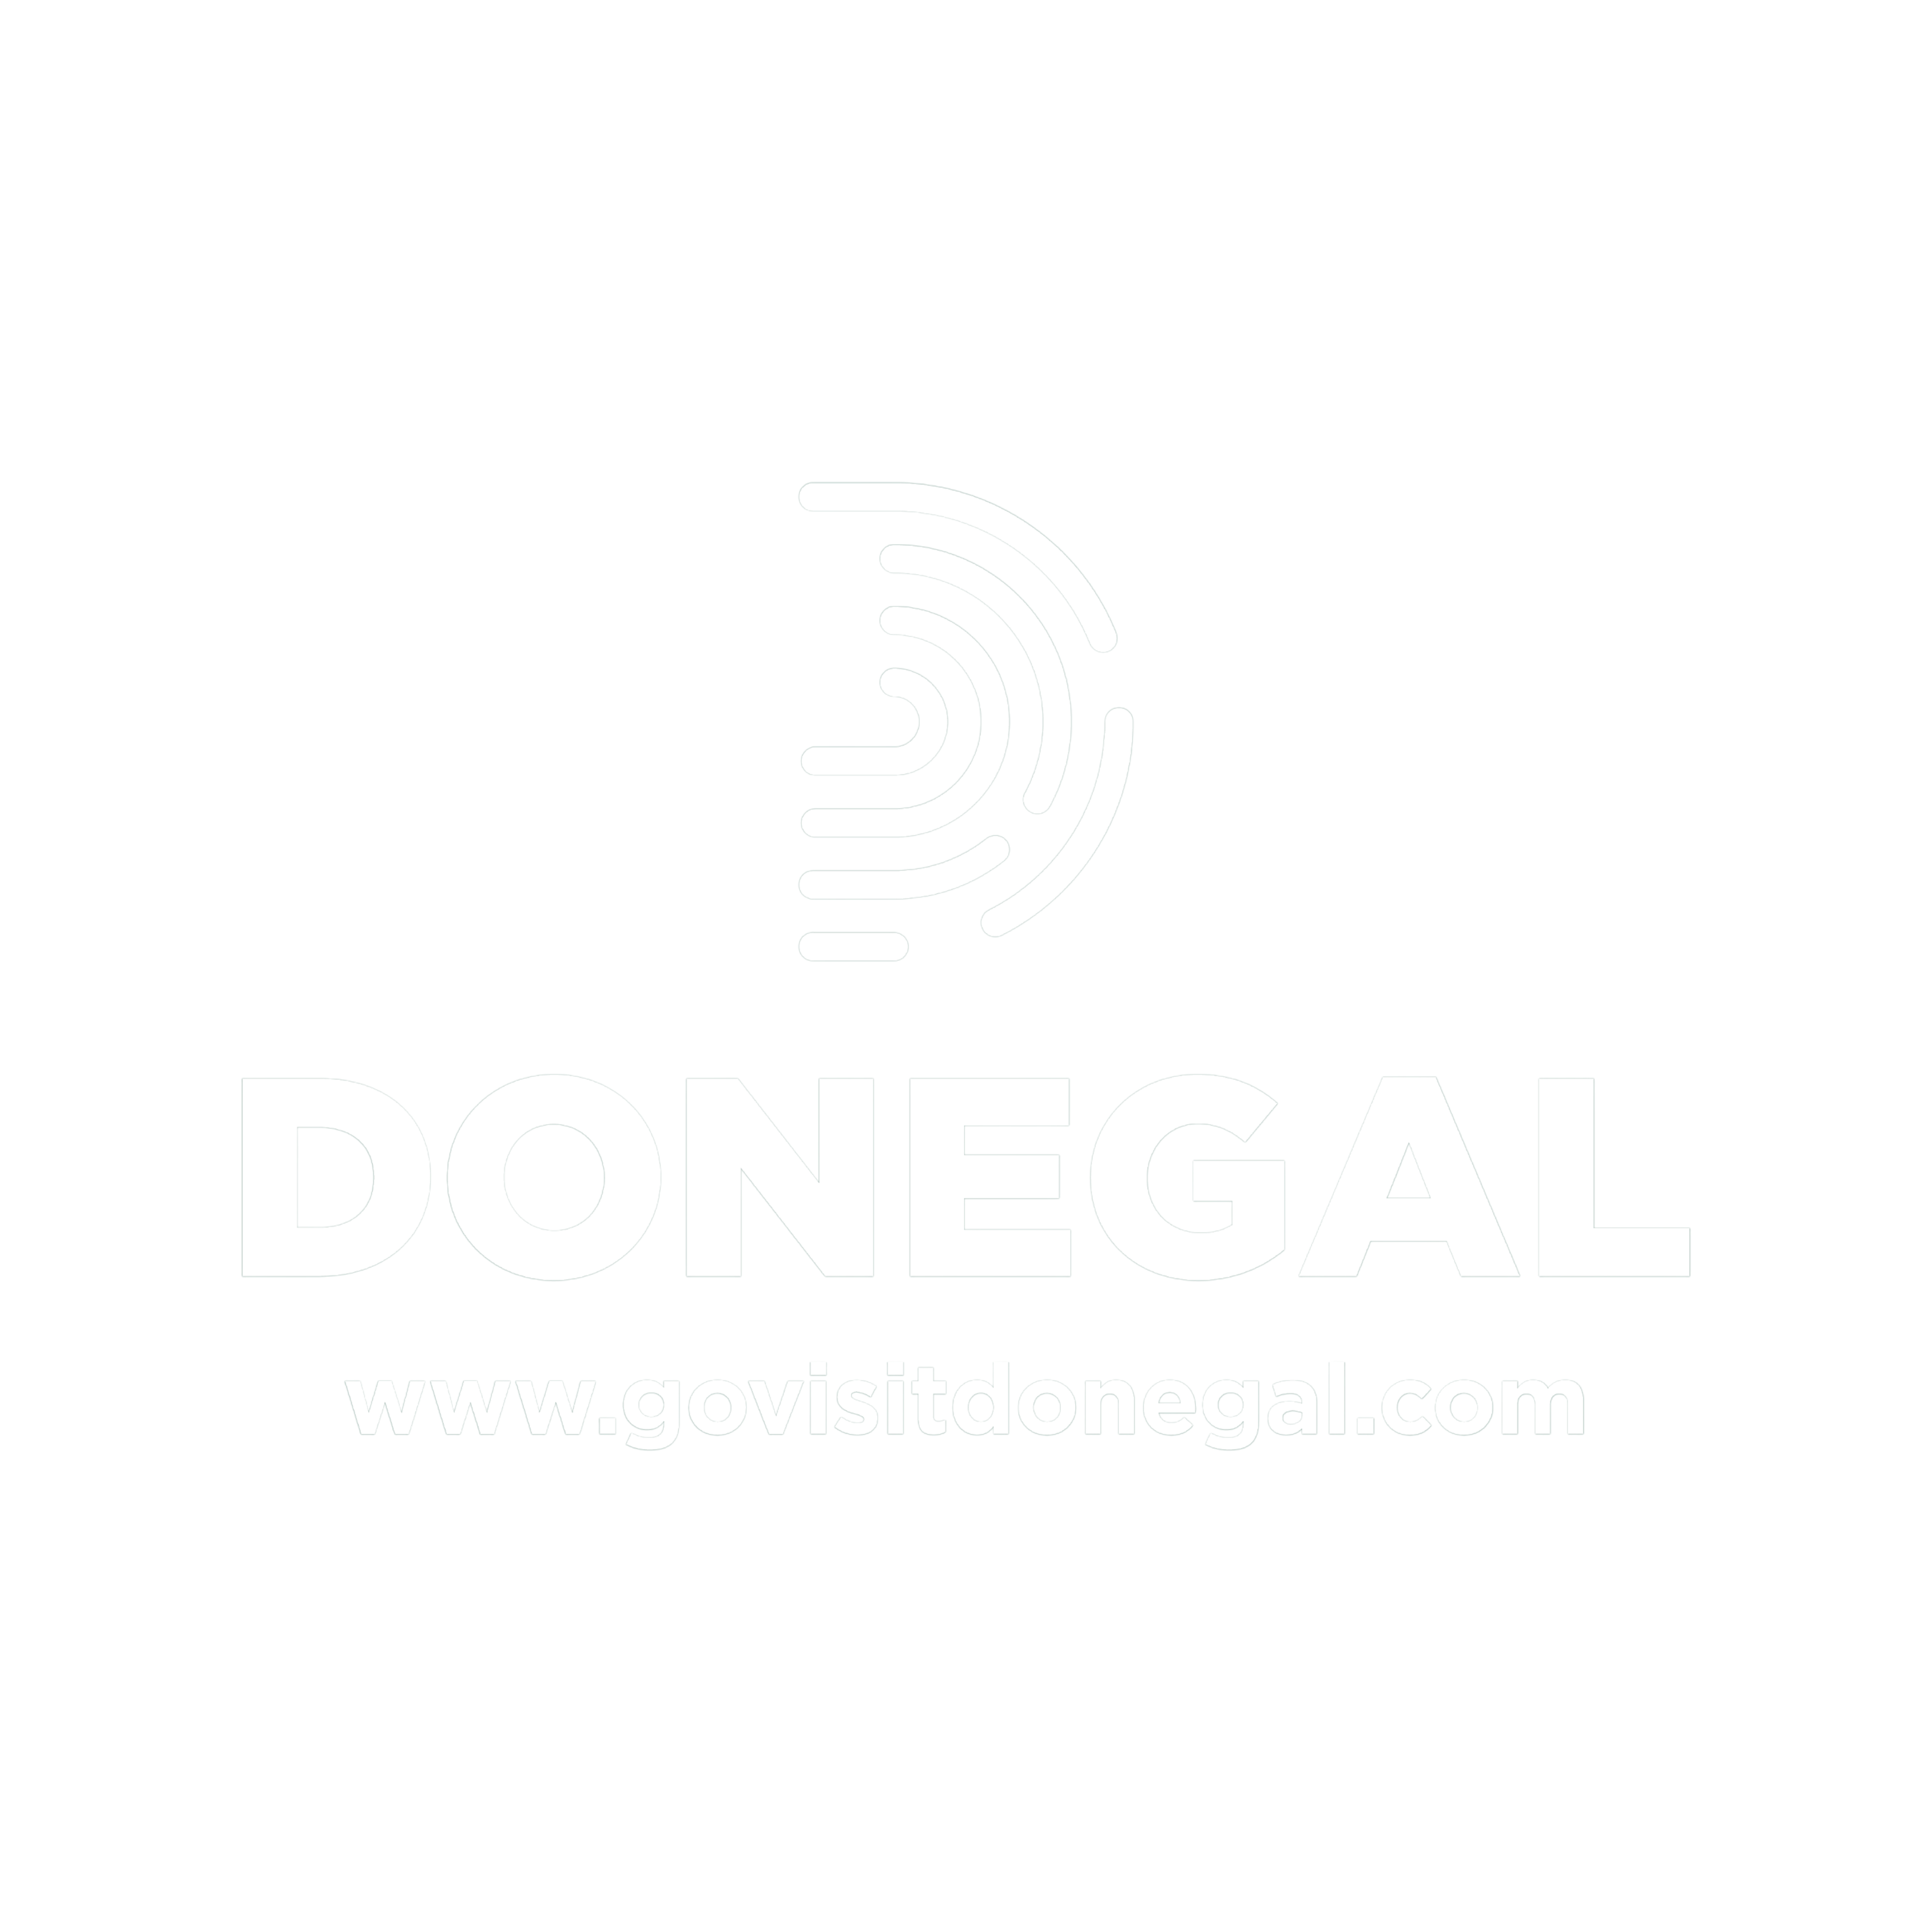 Donegal logo with no background, featuring Donegal website